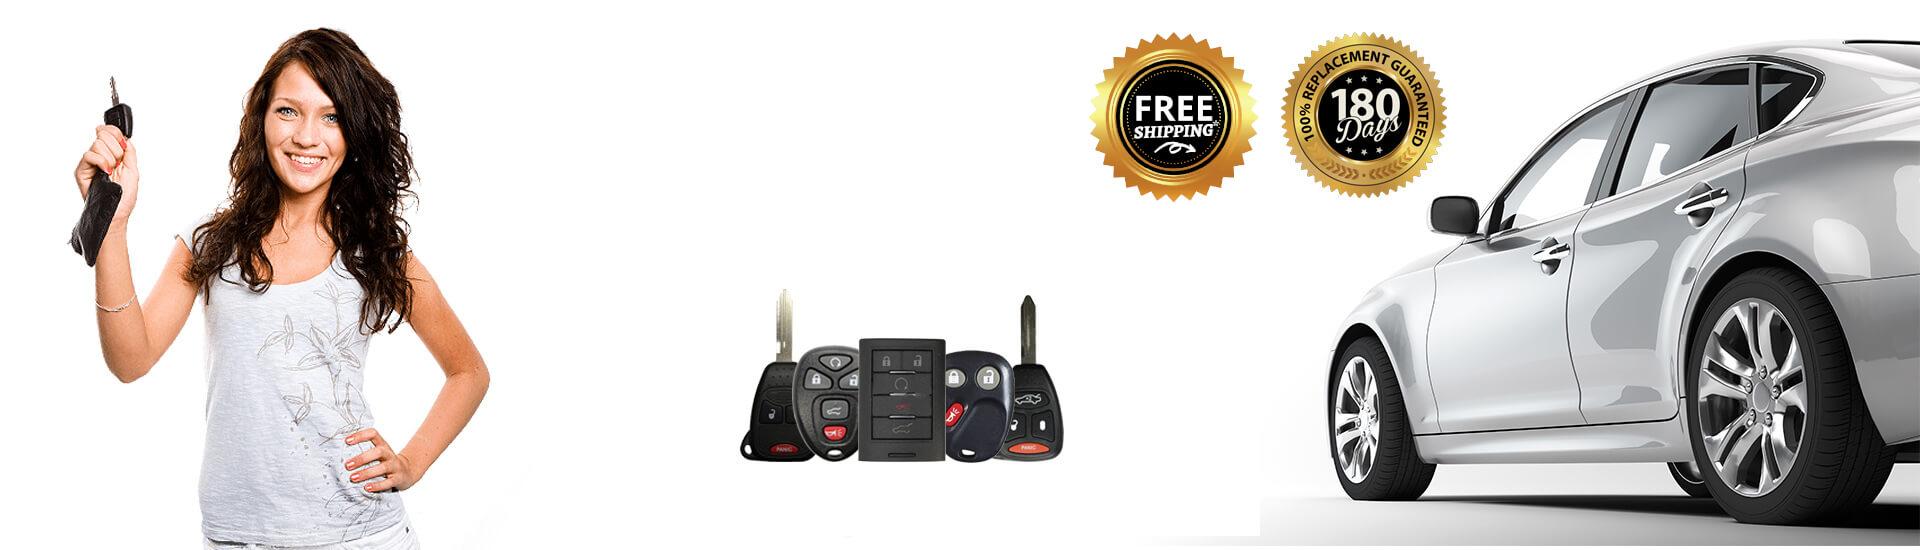 Car Remote Control Near Me: Find a replacement car remote control with these easy steps.